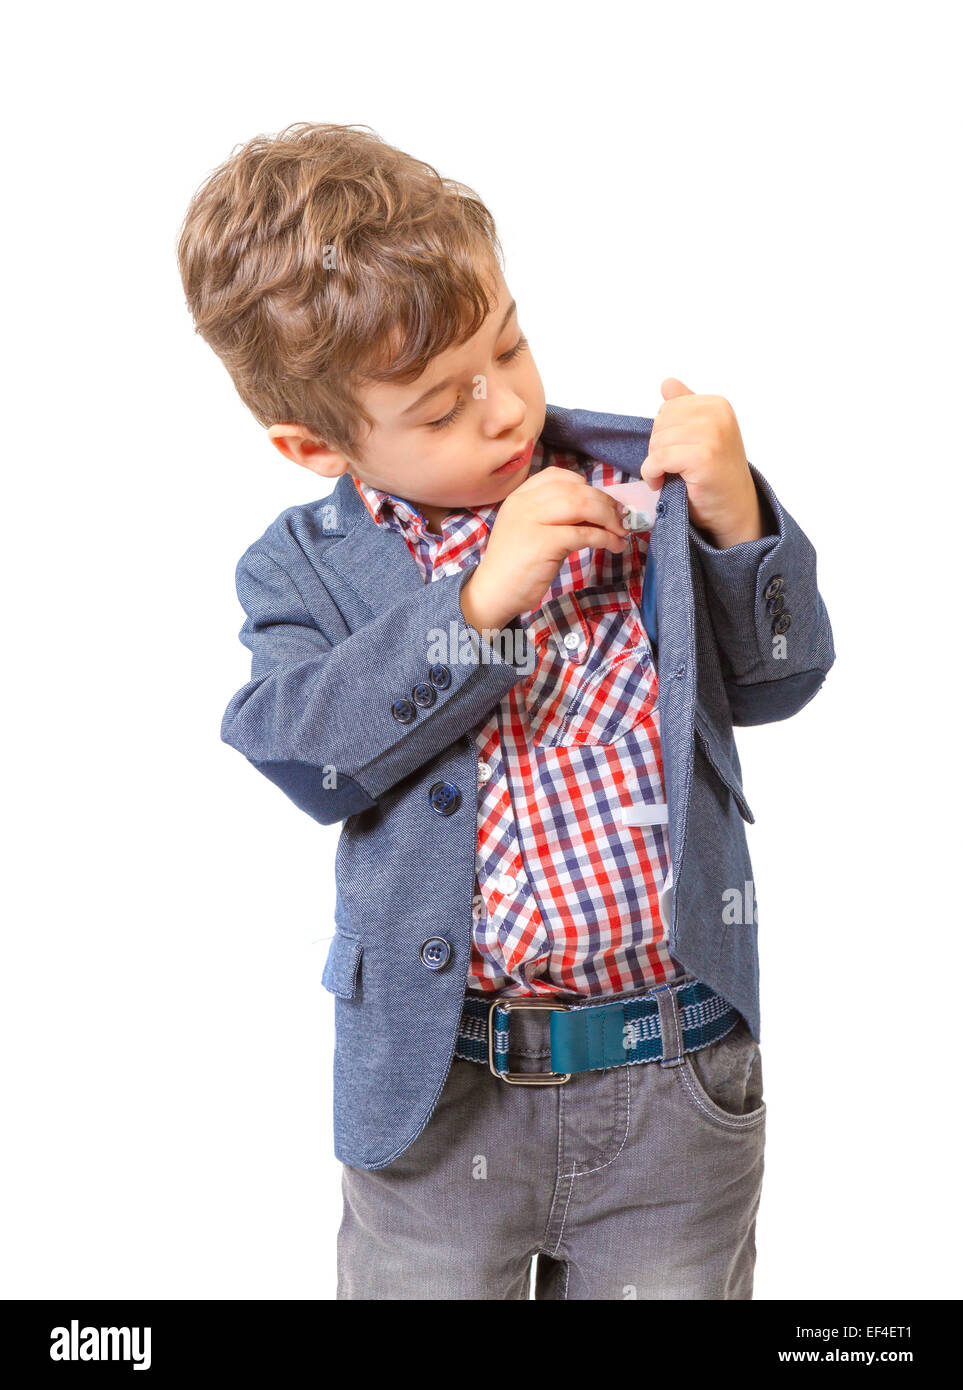 Little boy puts money in his pocket on white background Stock Photo